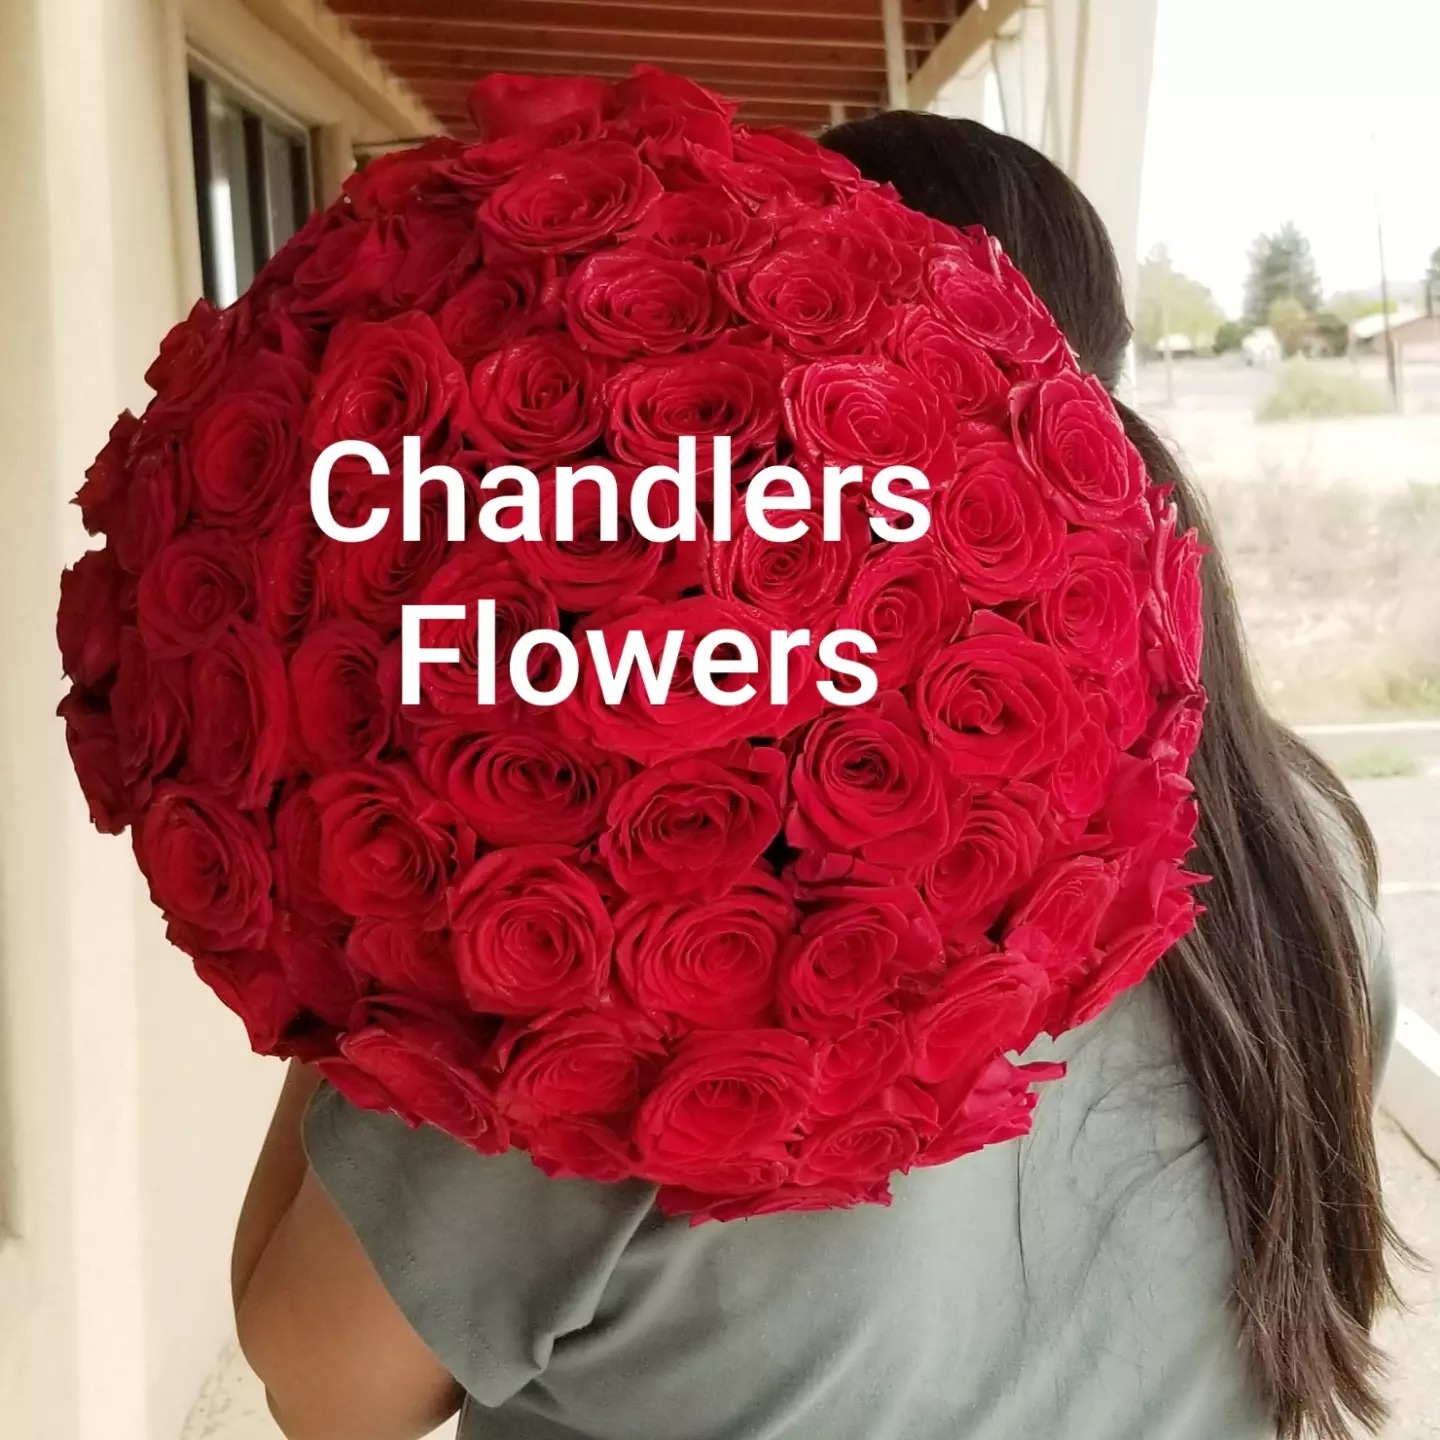 Chandler's Flowers & Gifts 605 E Florida St, Deming New Mexico 88030